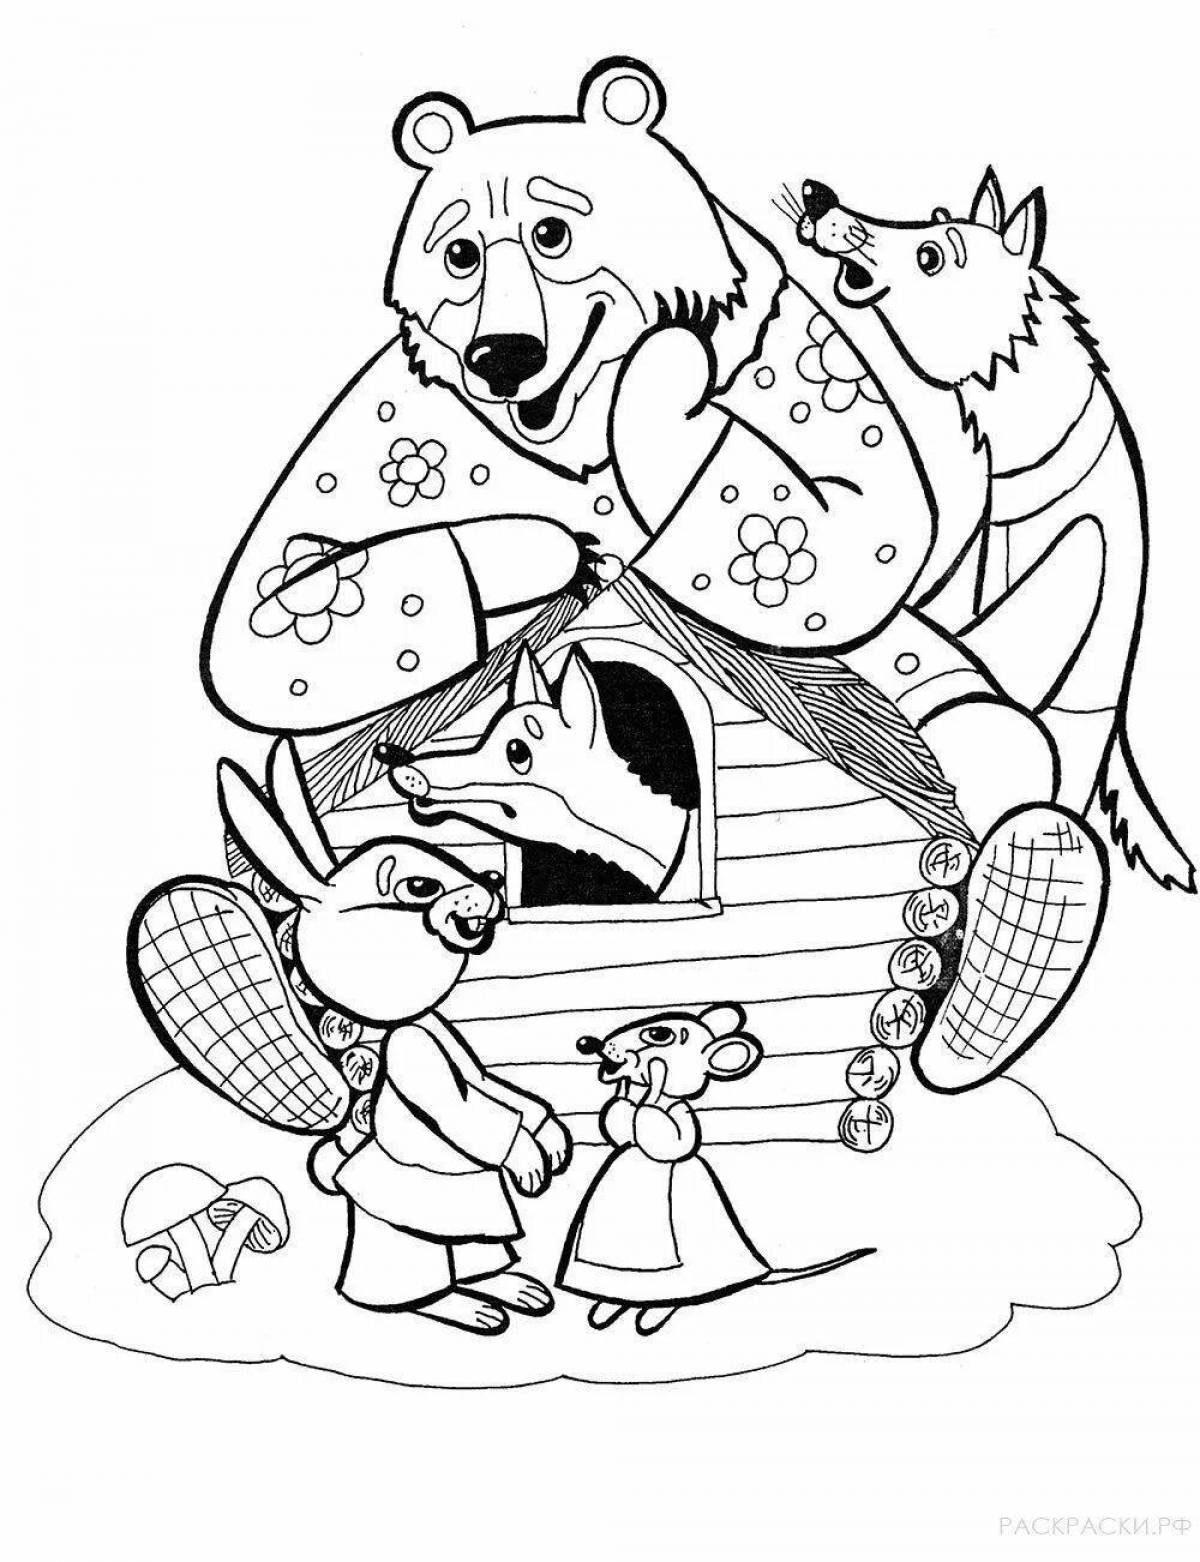 Coloring page charming bear teremok